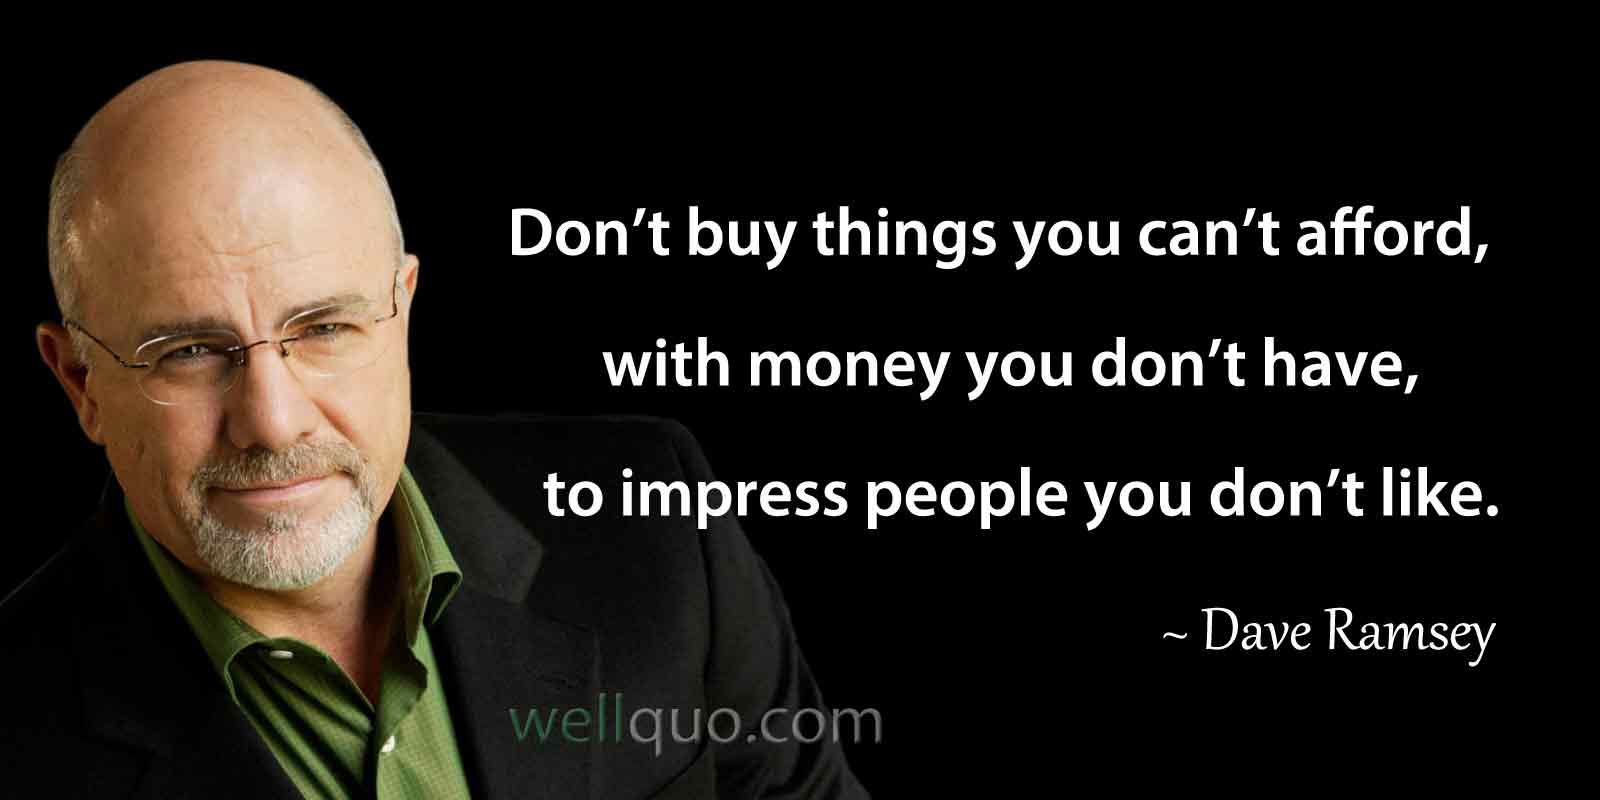 Dave Ramsey Quotes on Money - Don’t buy things you can’t afford, with money you don’t have, to impress people you don’t like.